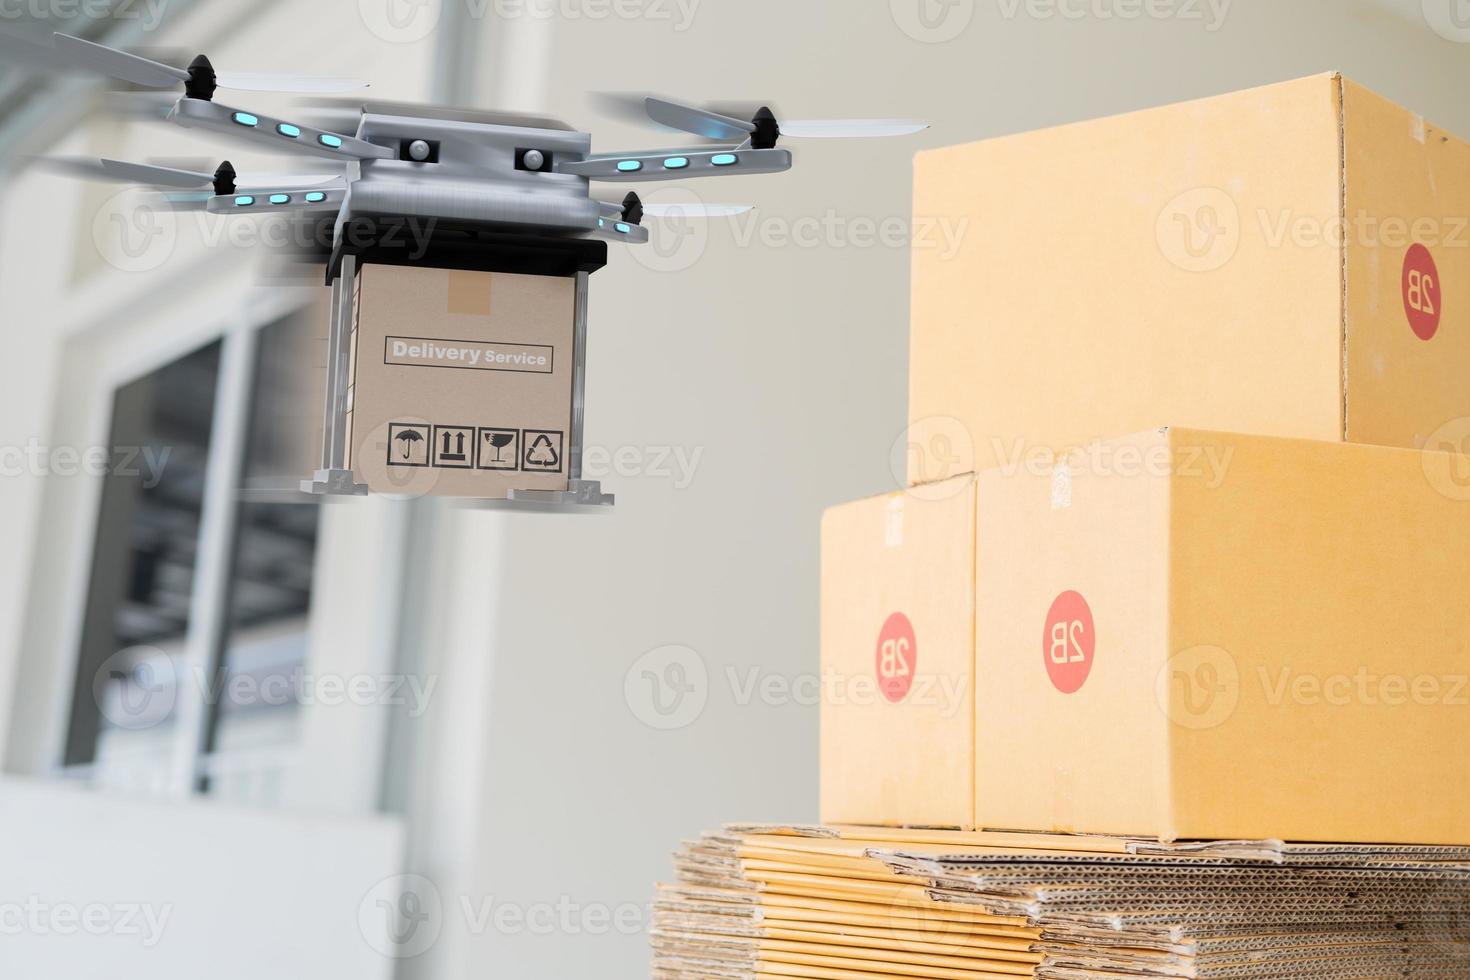 Drone technology engineering device for industry flying in industrial to logistic export import product home delivery service logistics shipping transport transportation or car auto parts showroom photo